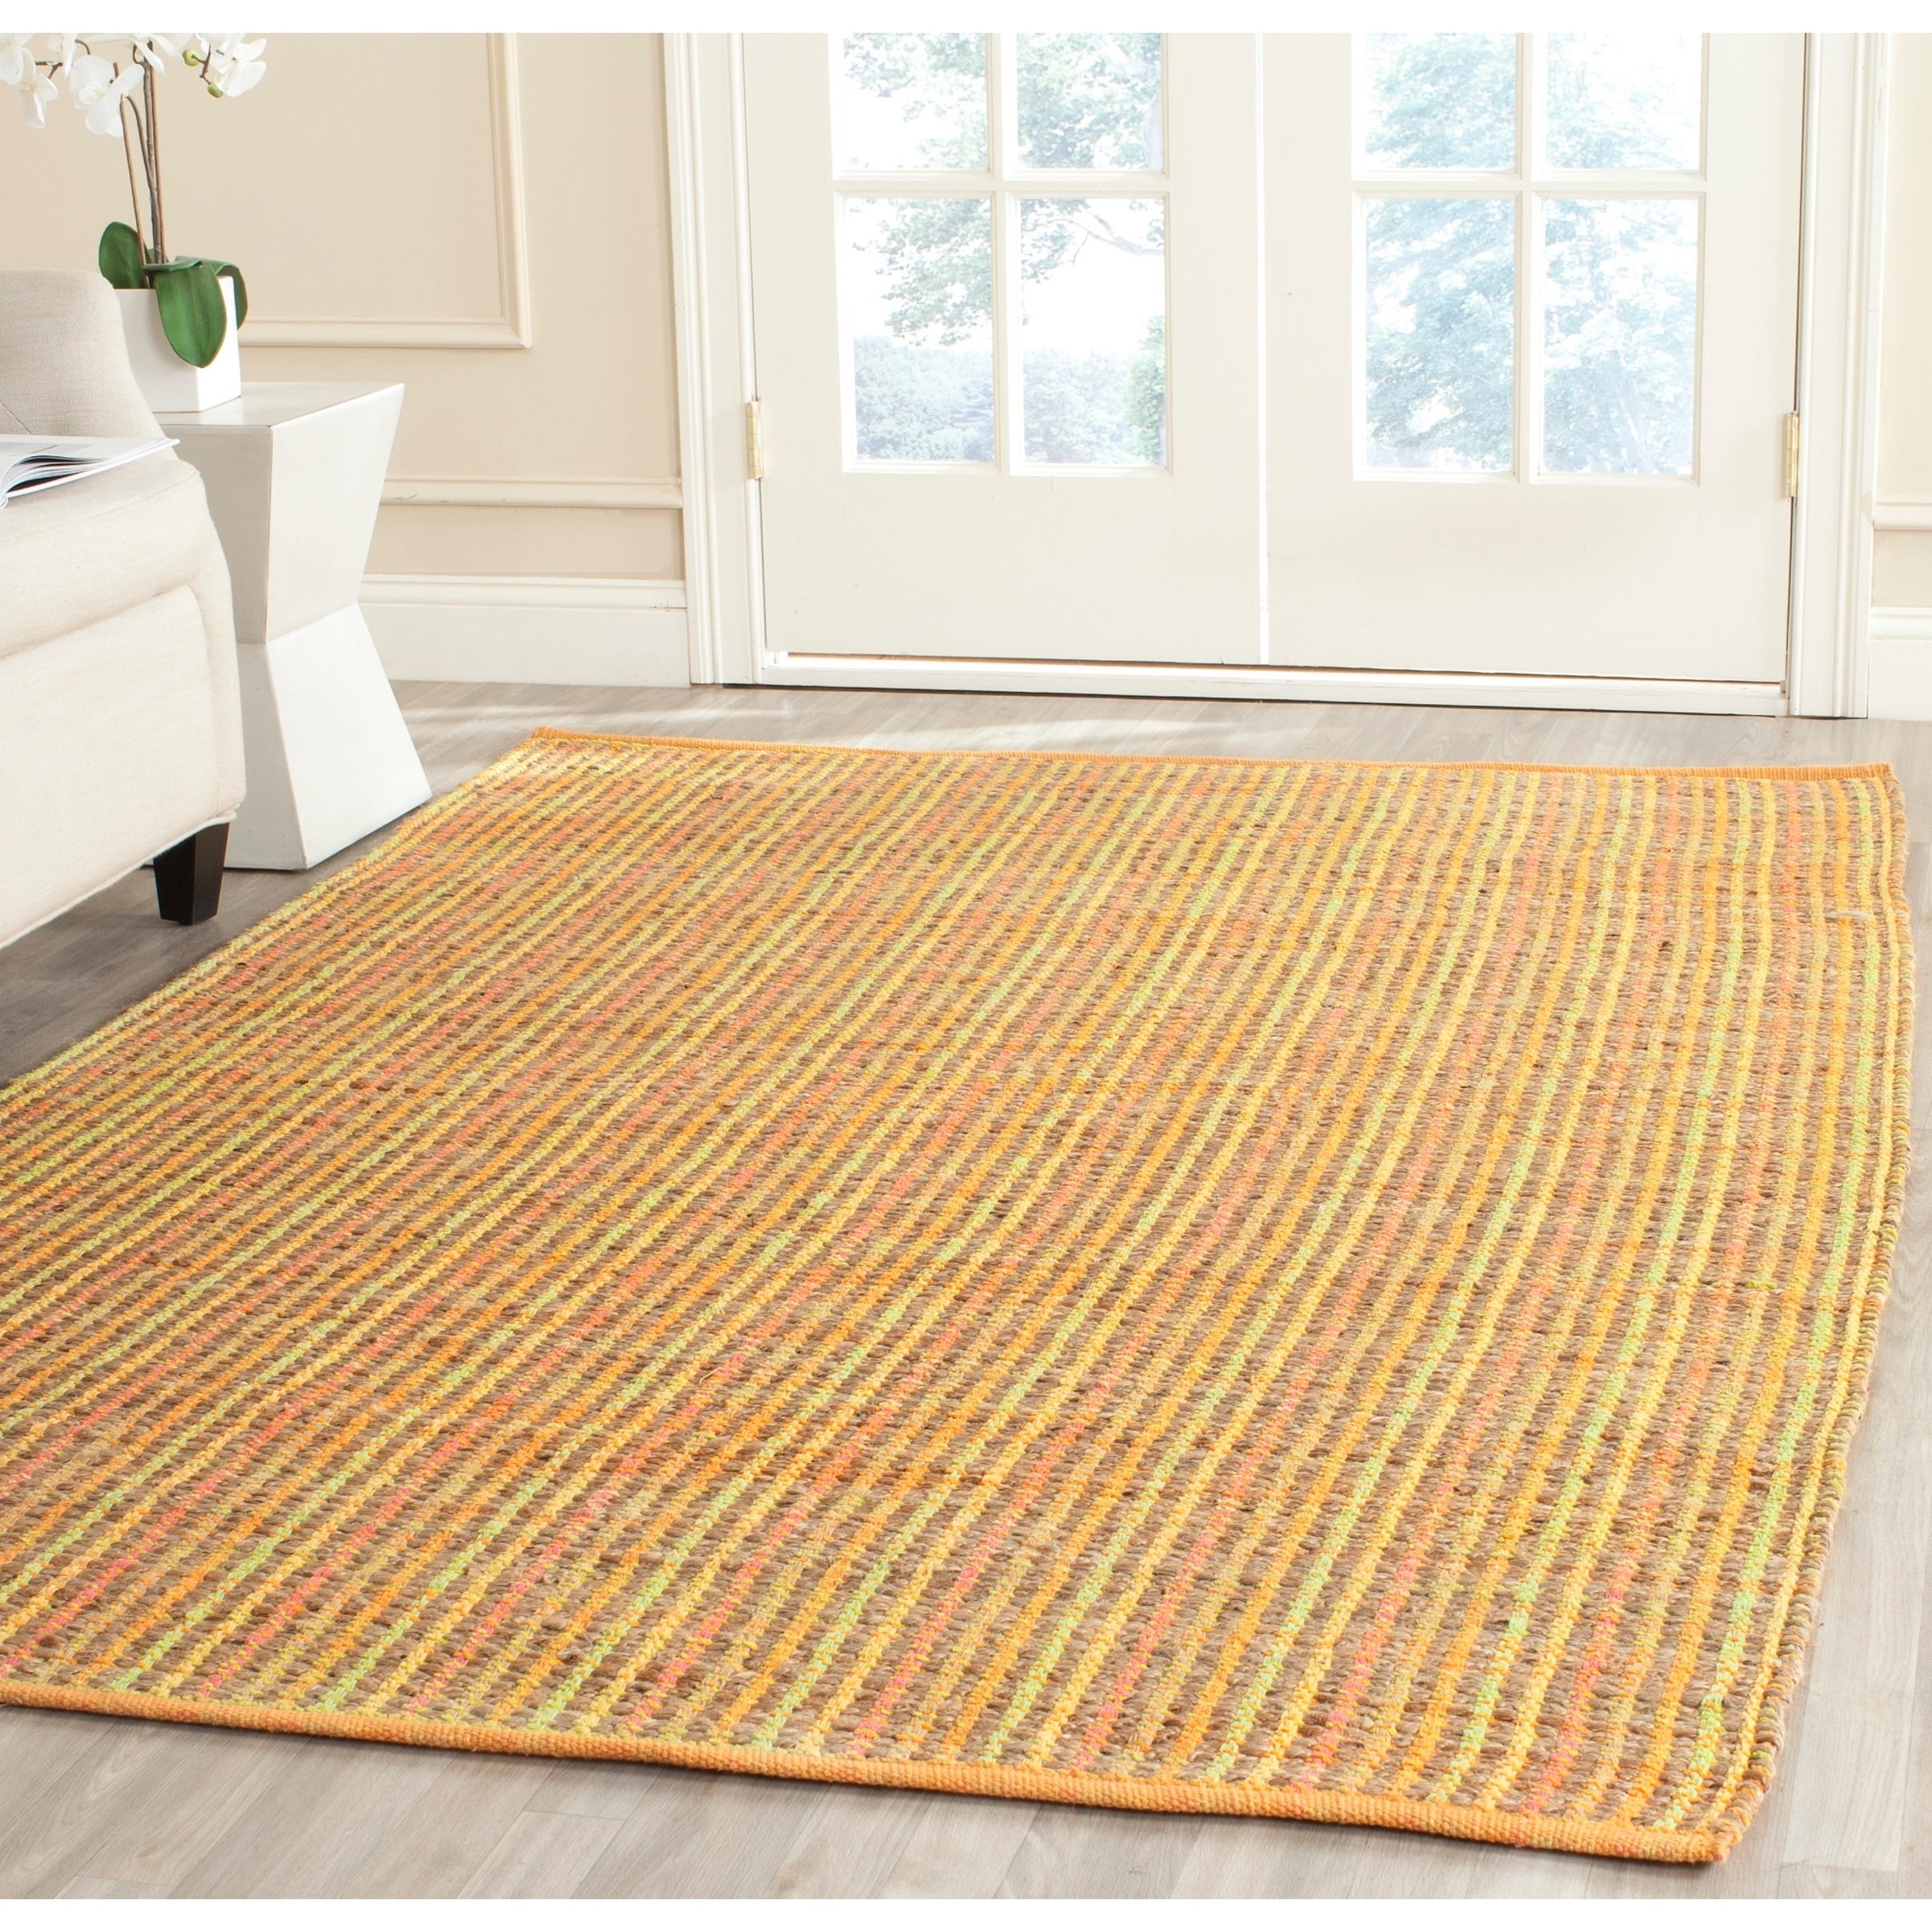 Safavieh Cape Cod Spring colored Handwoven Braided Jute Rug (4 X 6)